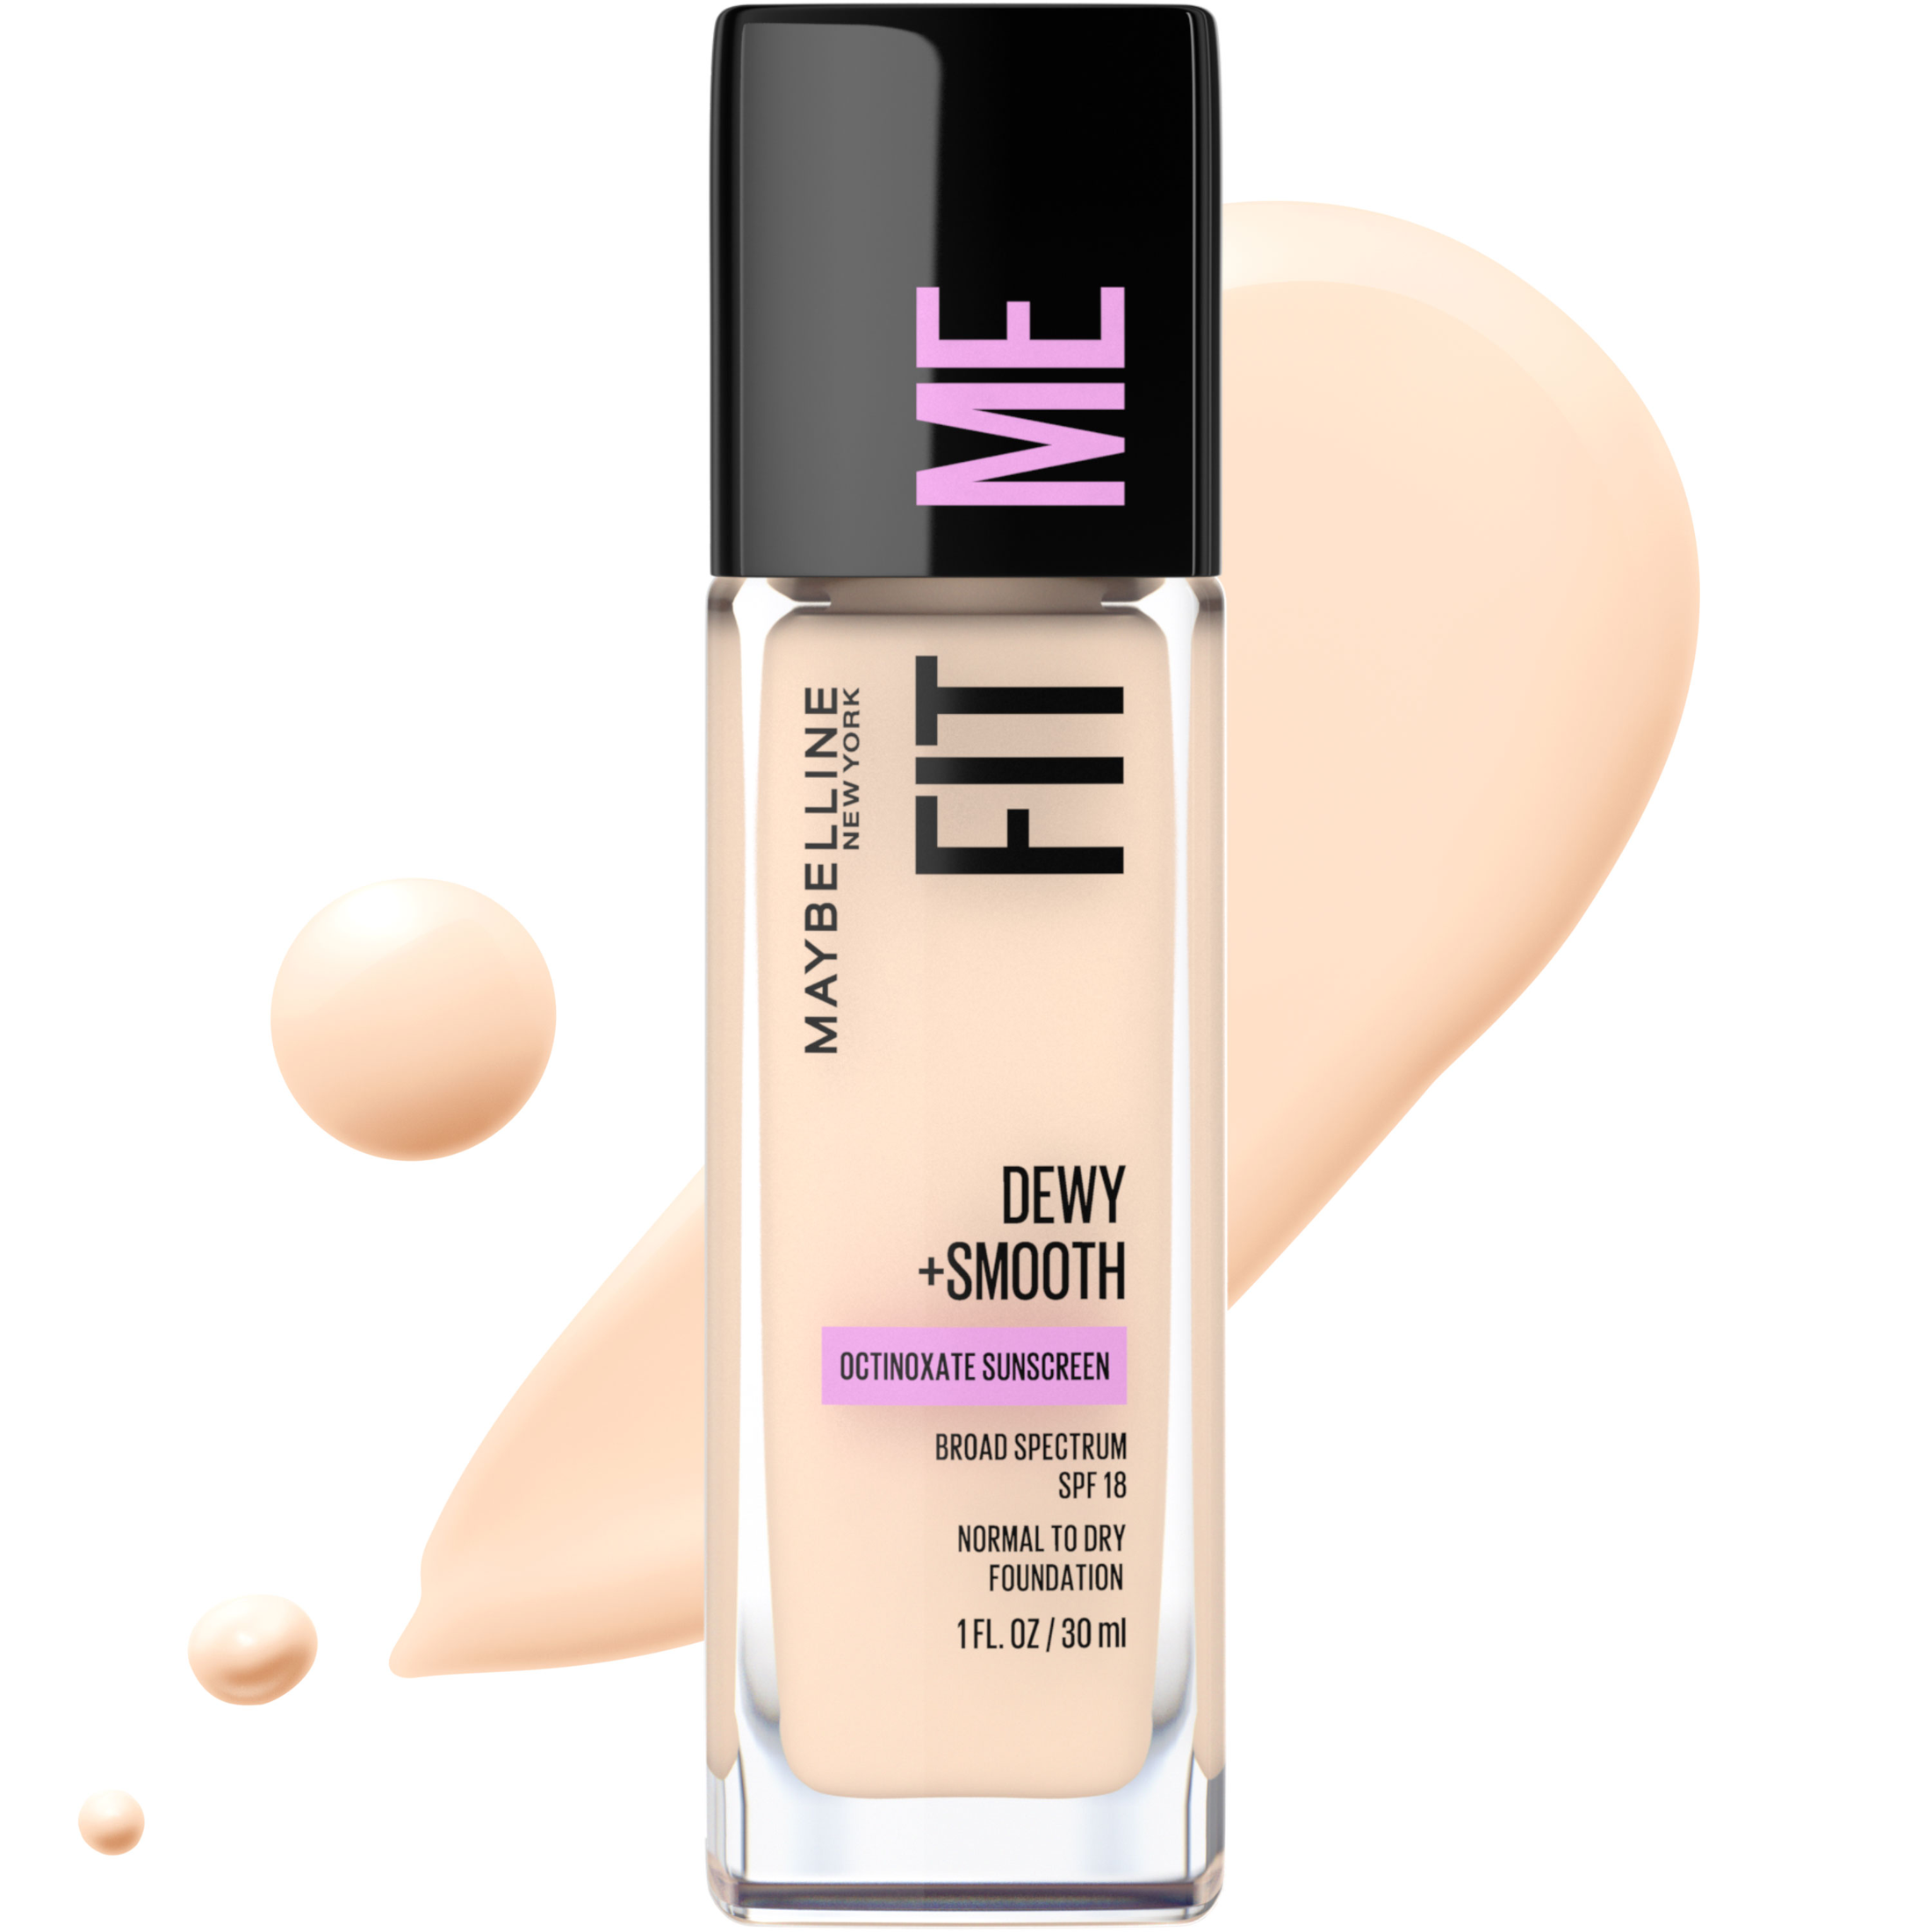 Maybelline Fit Me Dewy and Smooth Liquid Foundation, SPF 18, 102 Fair Porcelain, 1 fl oz - image 1 of 9